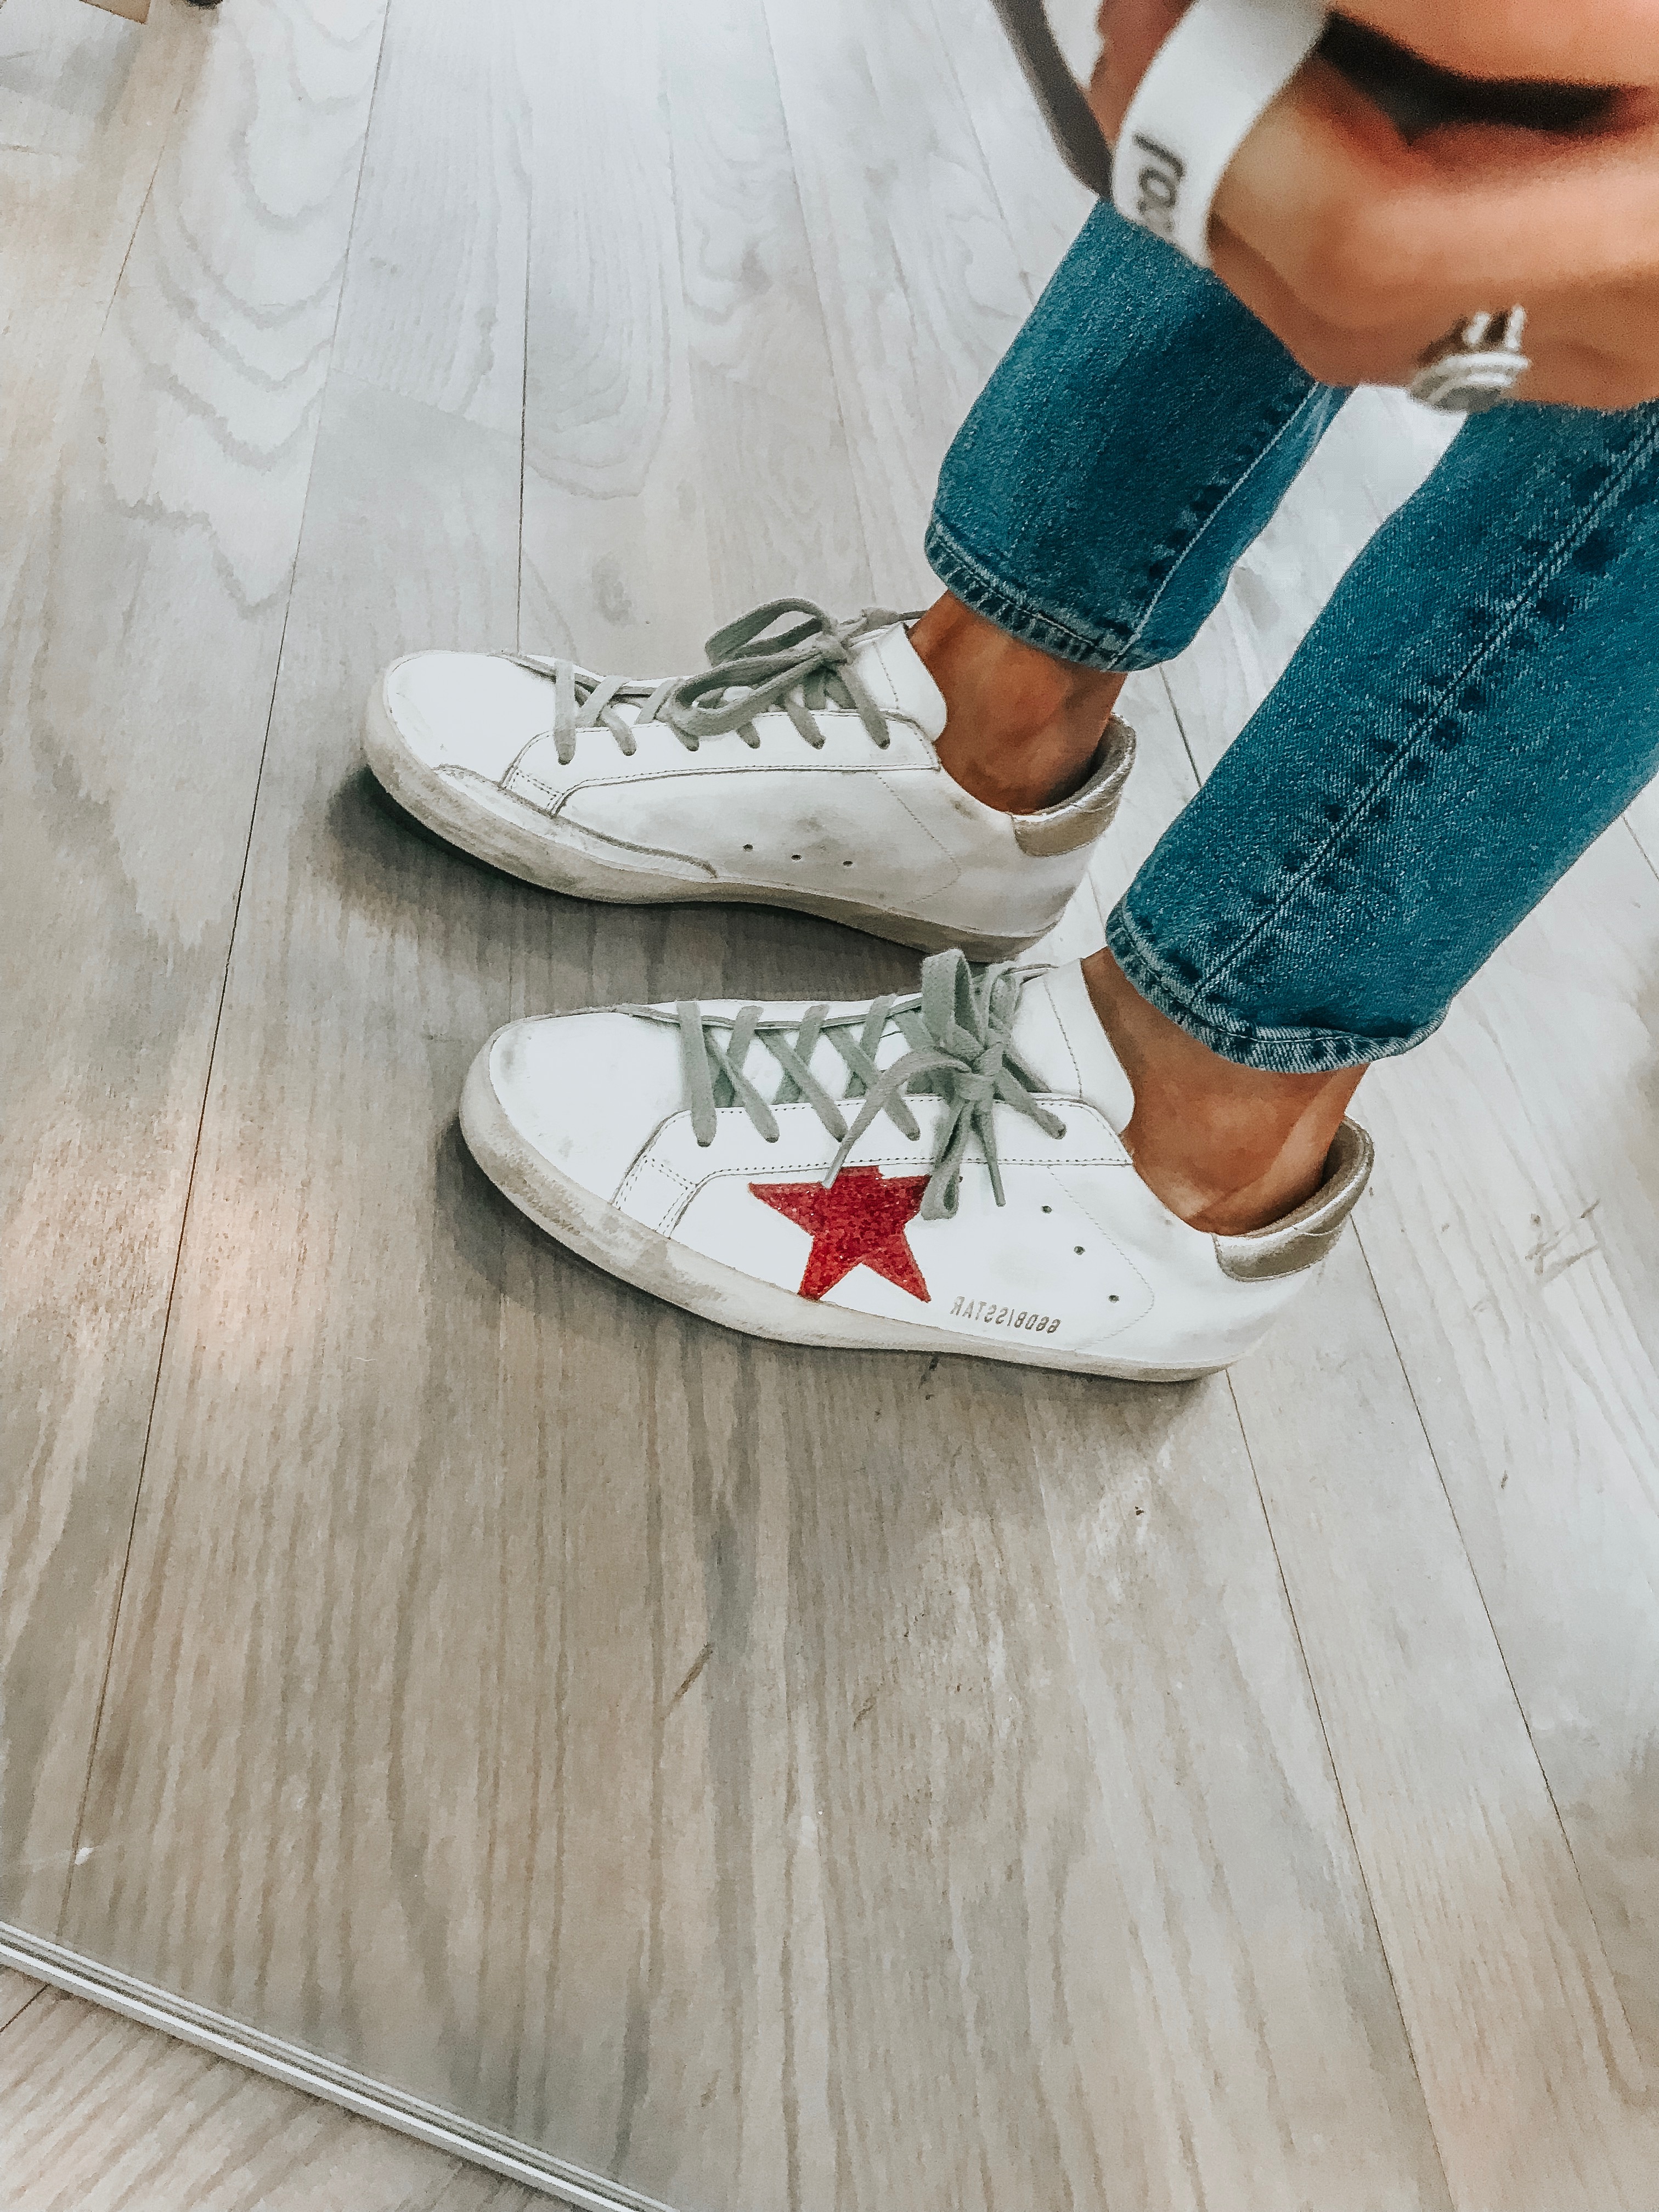 How to Keep Your White Sneakers CLEAN 